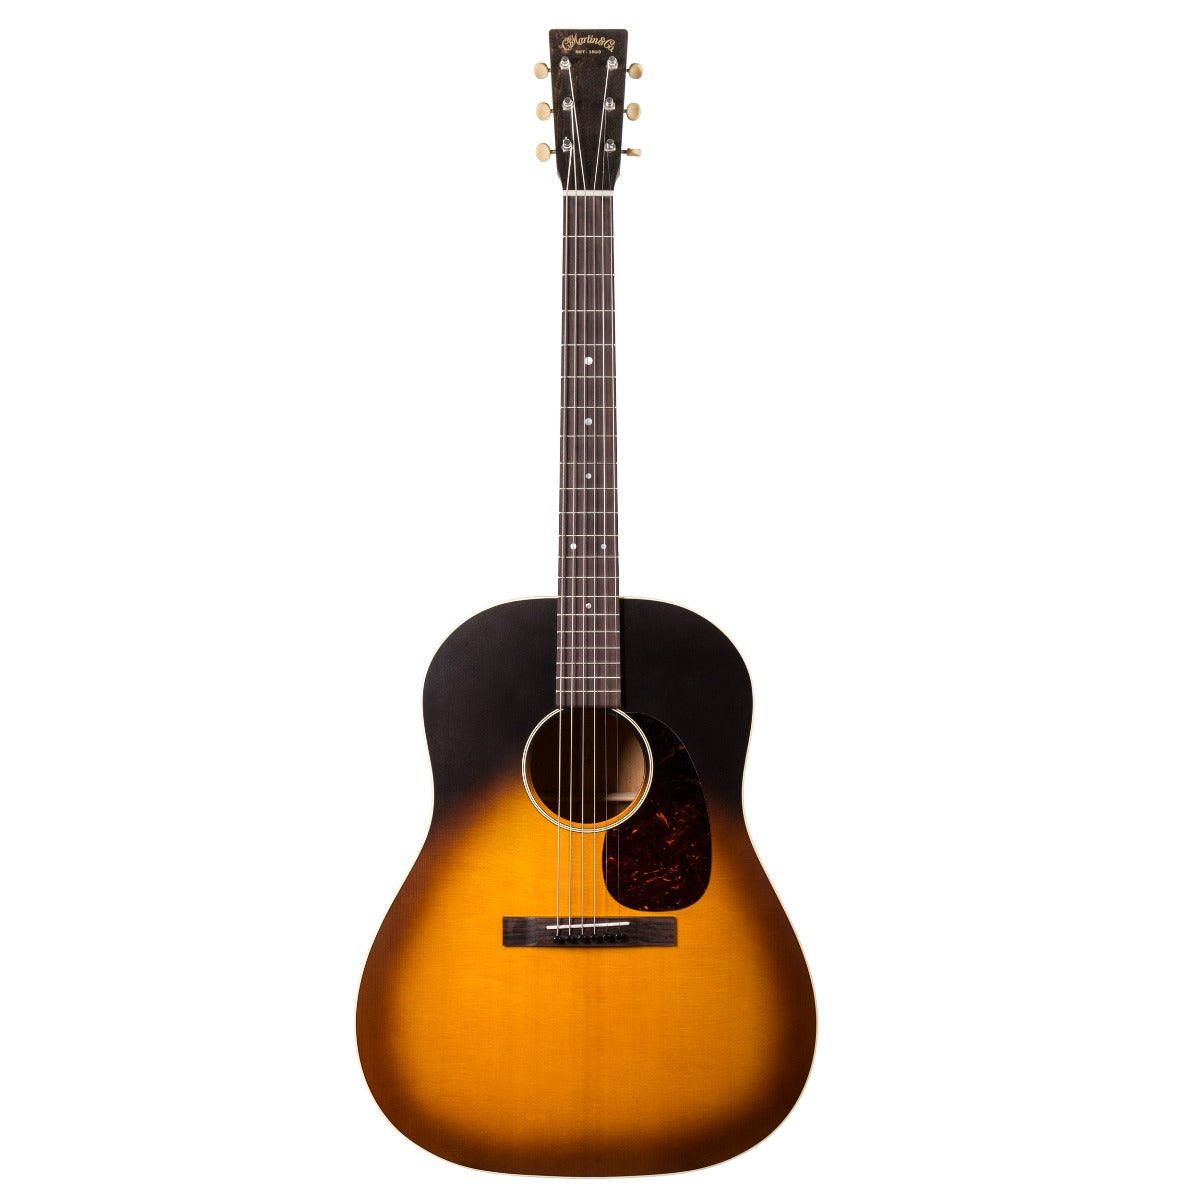 Martin DSS-17 Dreadnought Acoustic Guitar, Whiskey Sunset